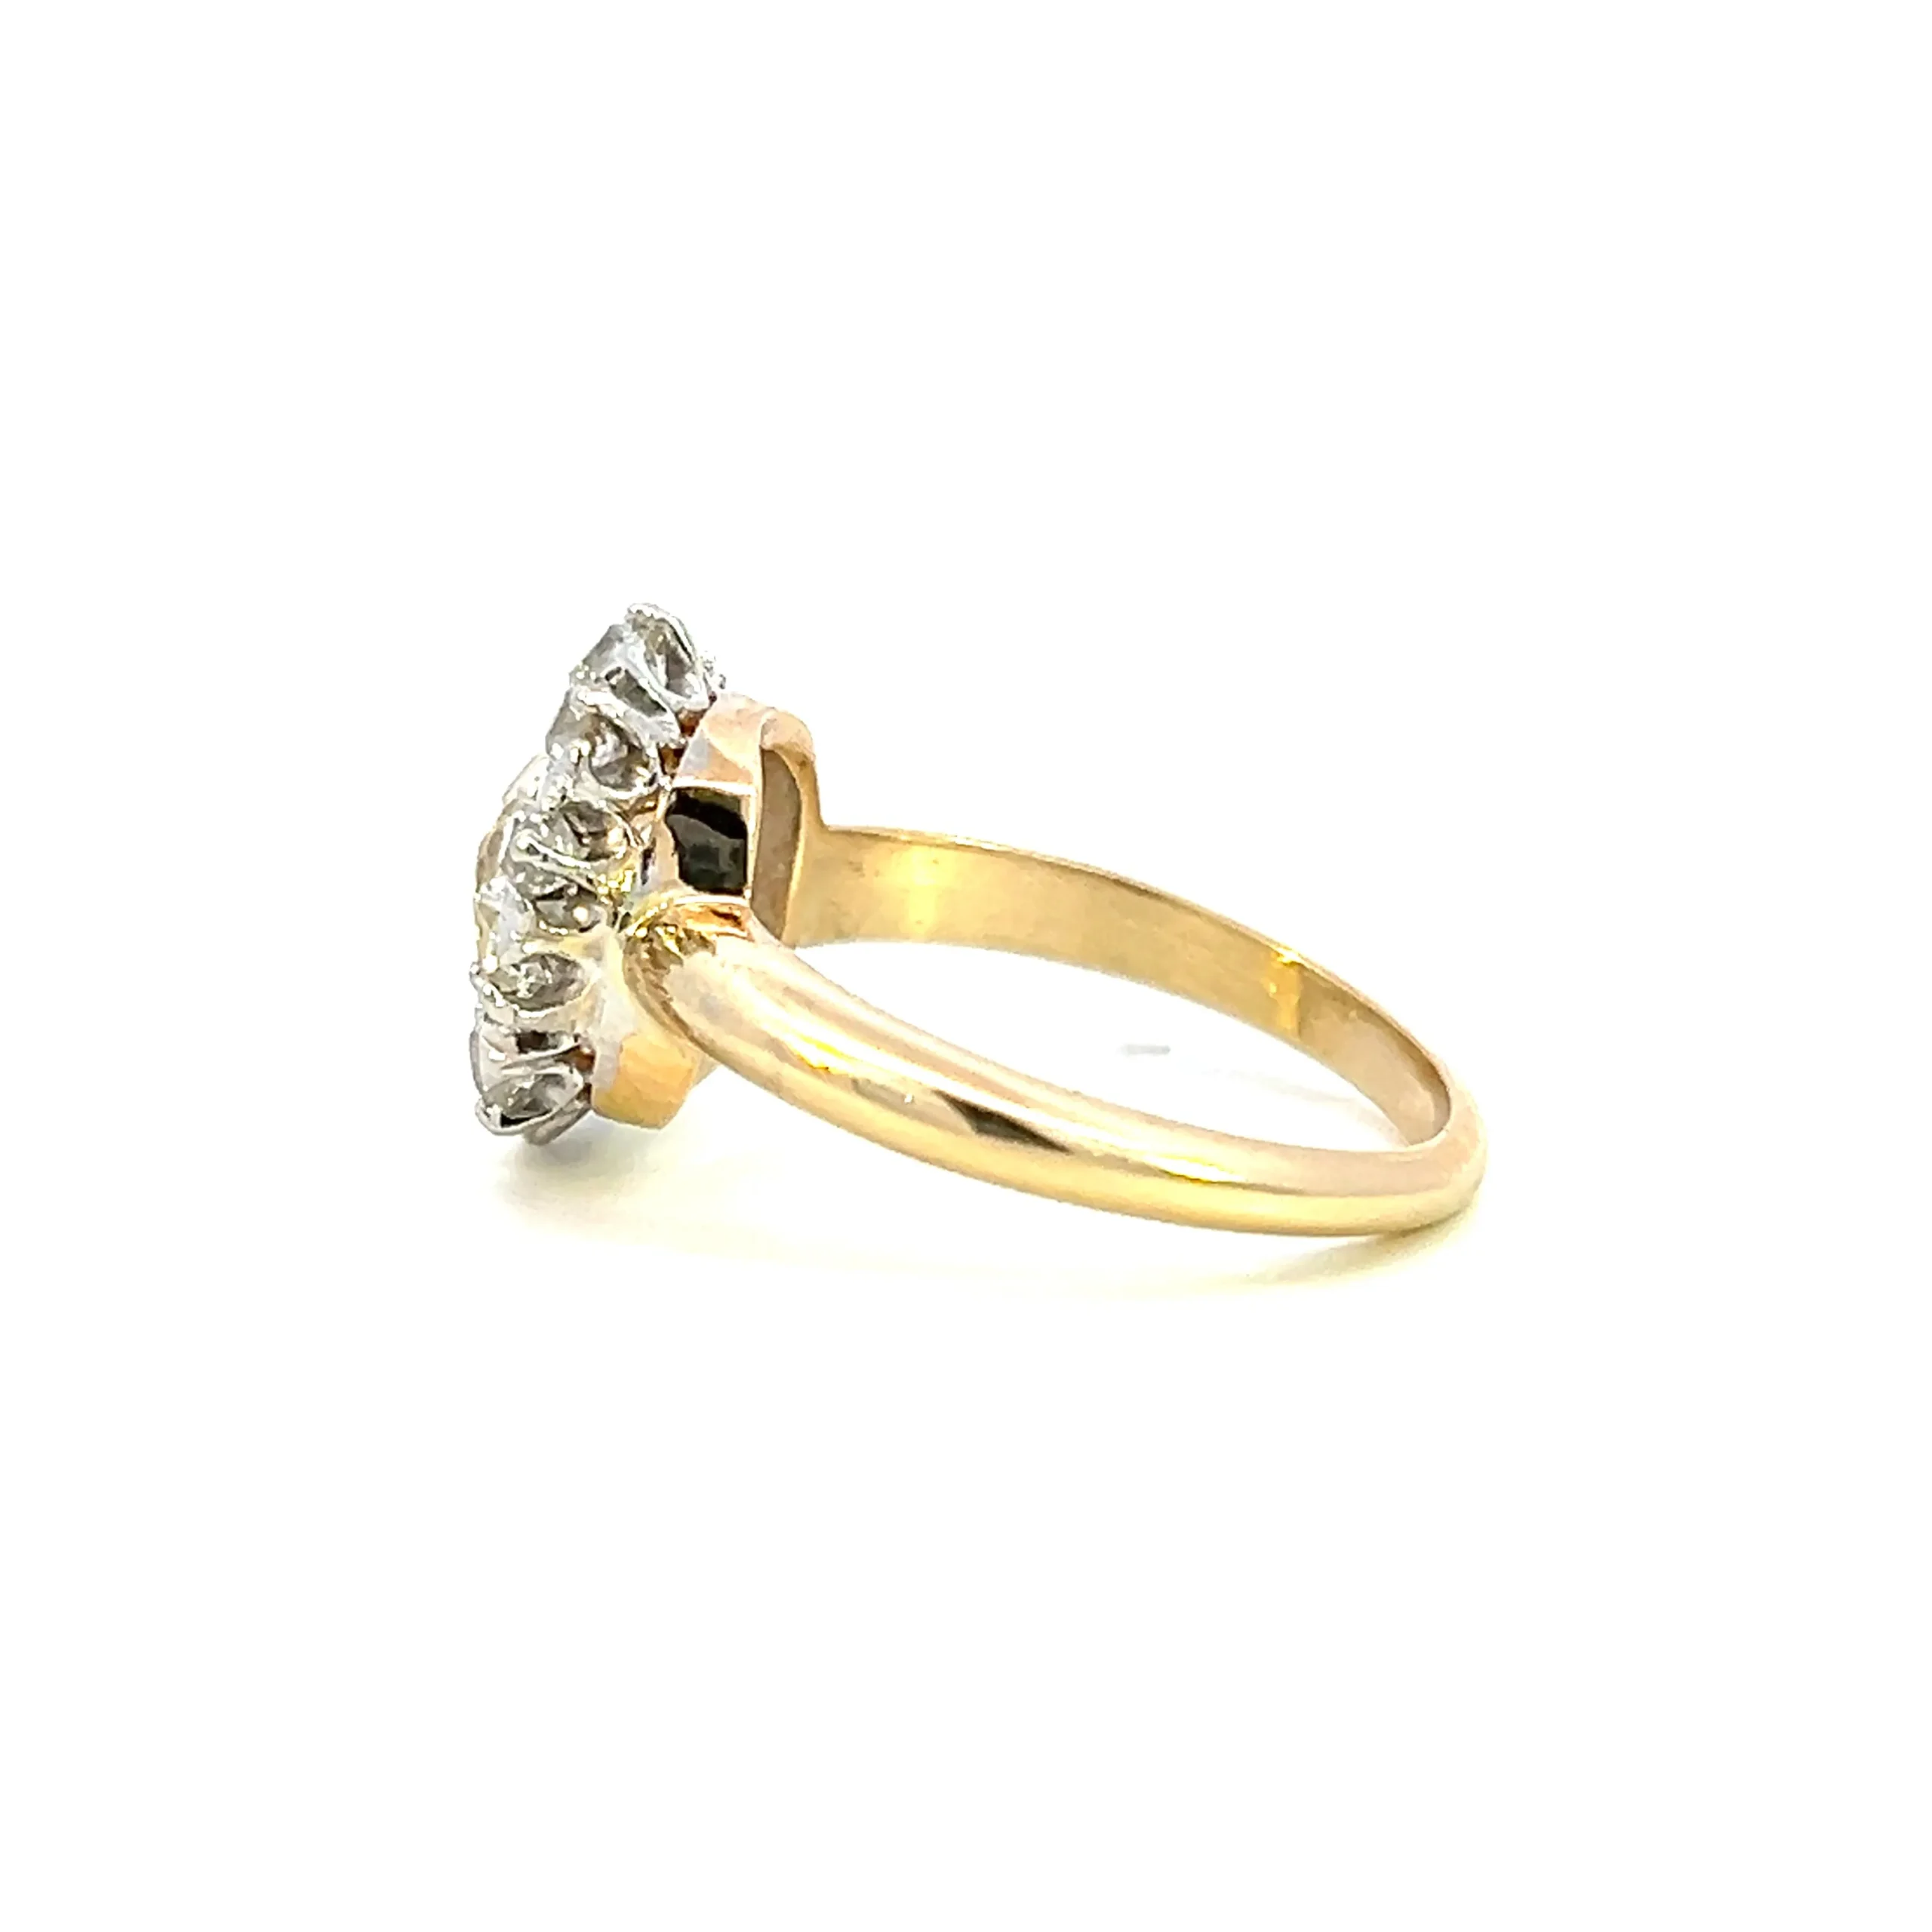 One estate 14 karat yellow gold and platinum ring set with a center old mine-cut diamond weighing 1.51 carats with M color and SI1 clarity and 10 old mine-cut diamonds weighing 0.50 total carat weight set in a halo. The ring is from the Edwardian era.